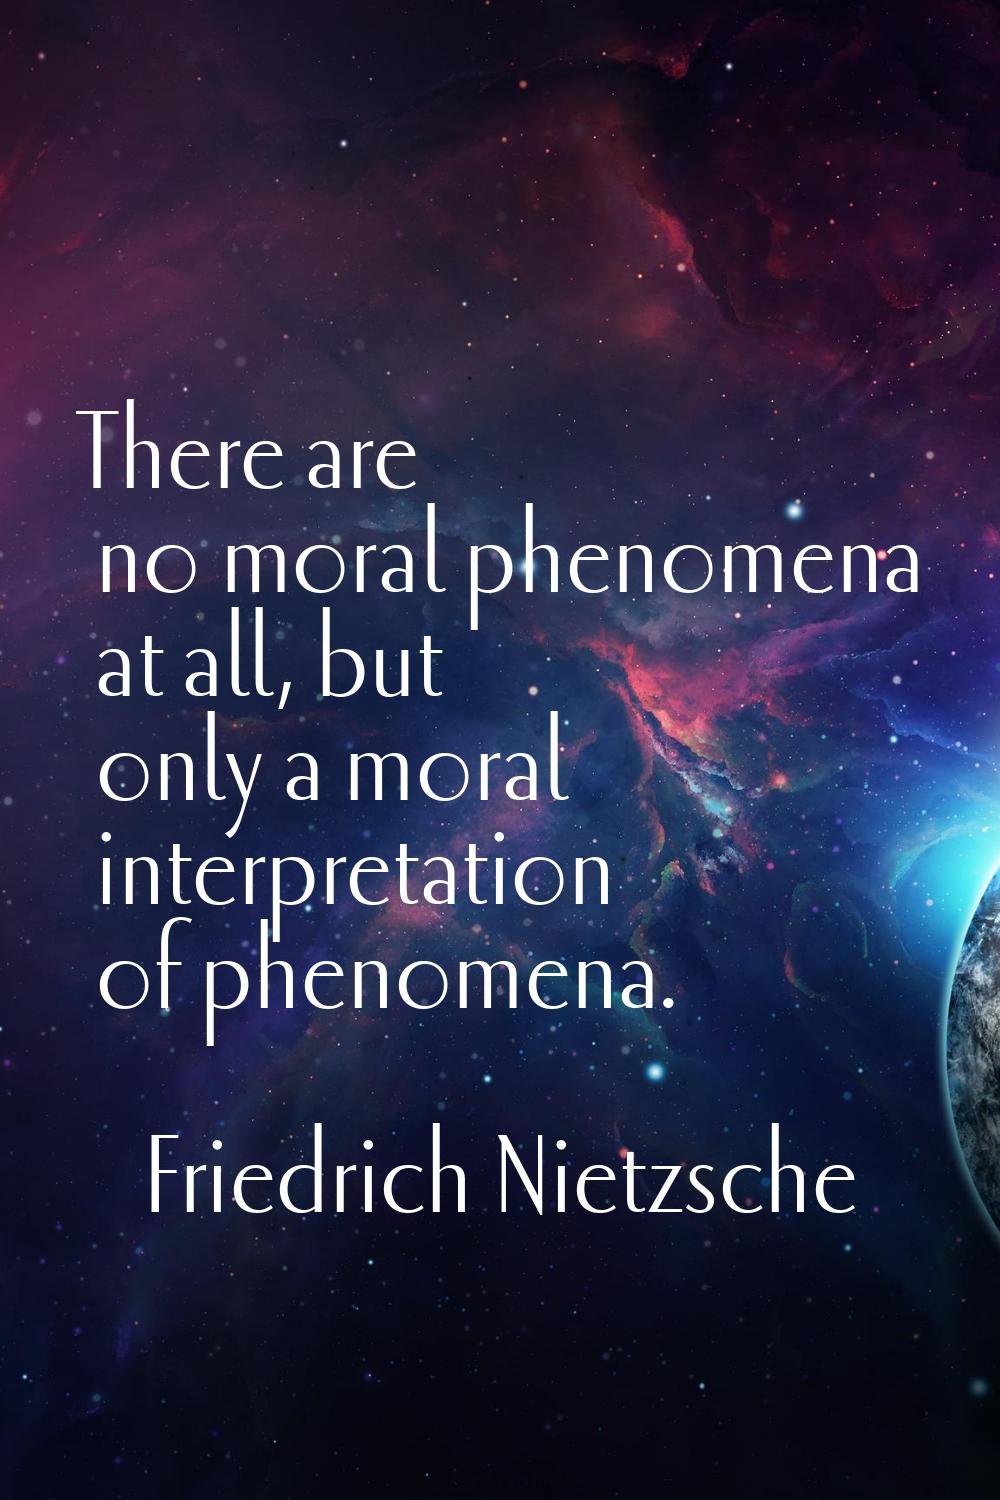 There are no moral phenomena at all, but only a moral interpretation of phenomena.